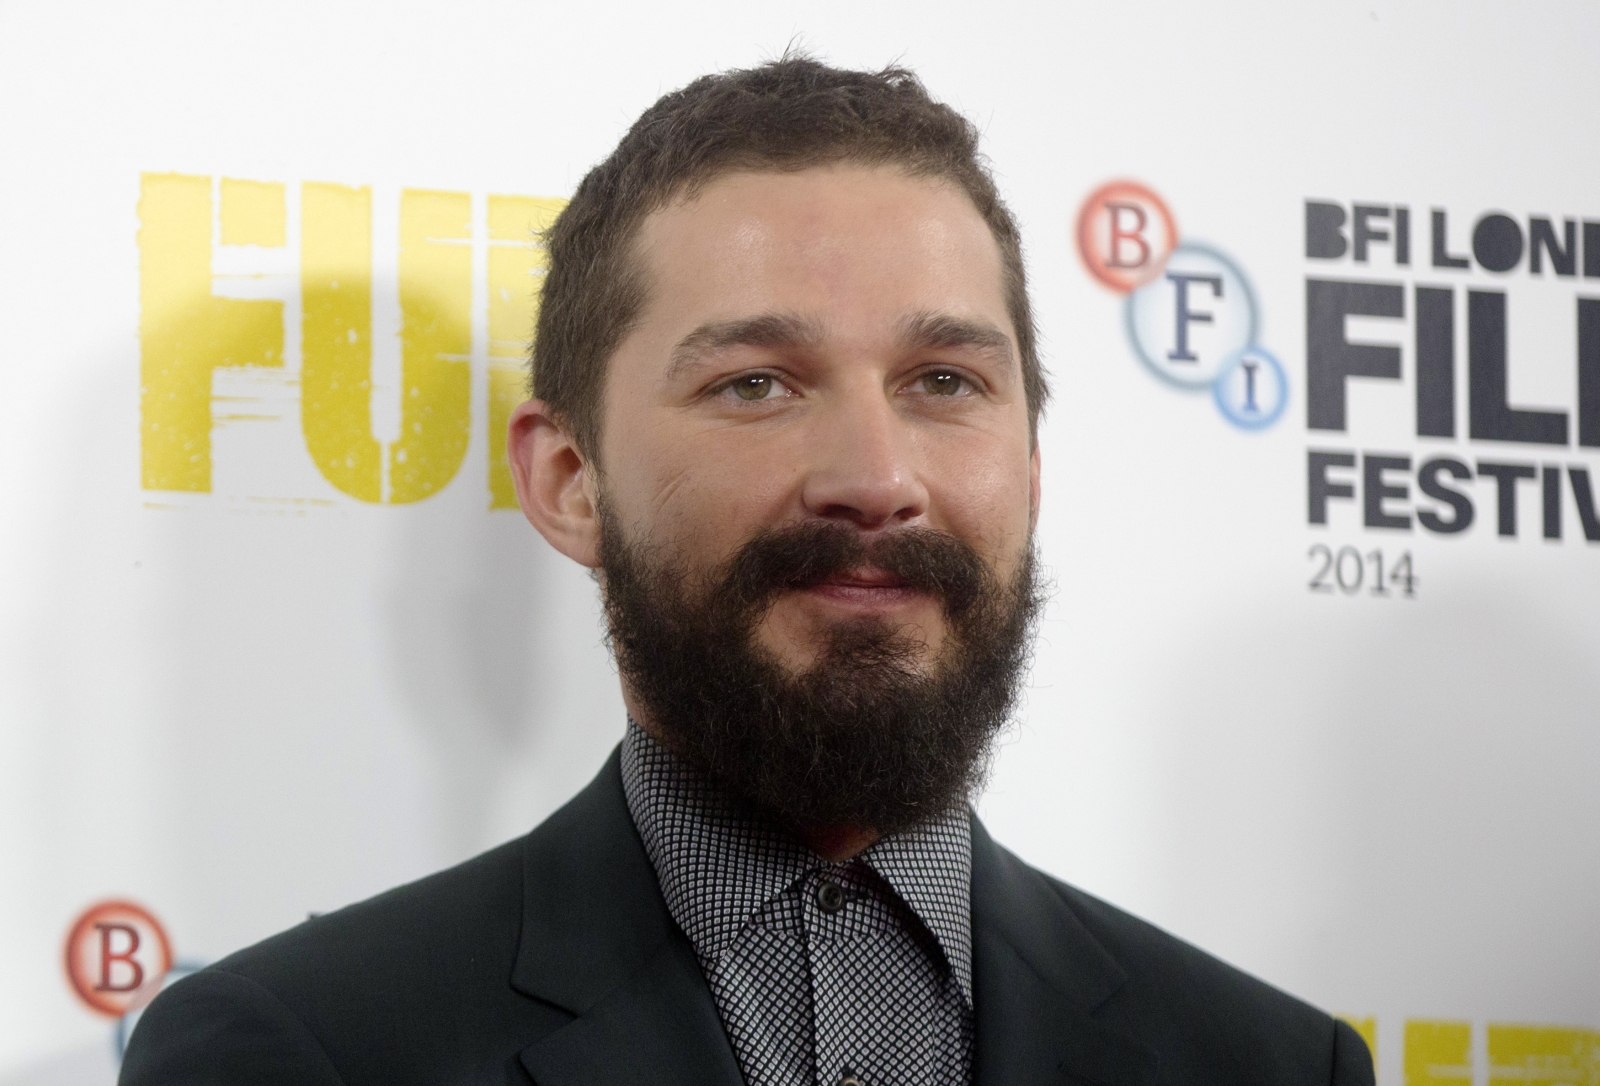 Shia LaBeouf slams Transformers movies in freestyle rap: 'I'm so past that'